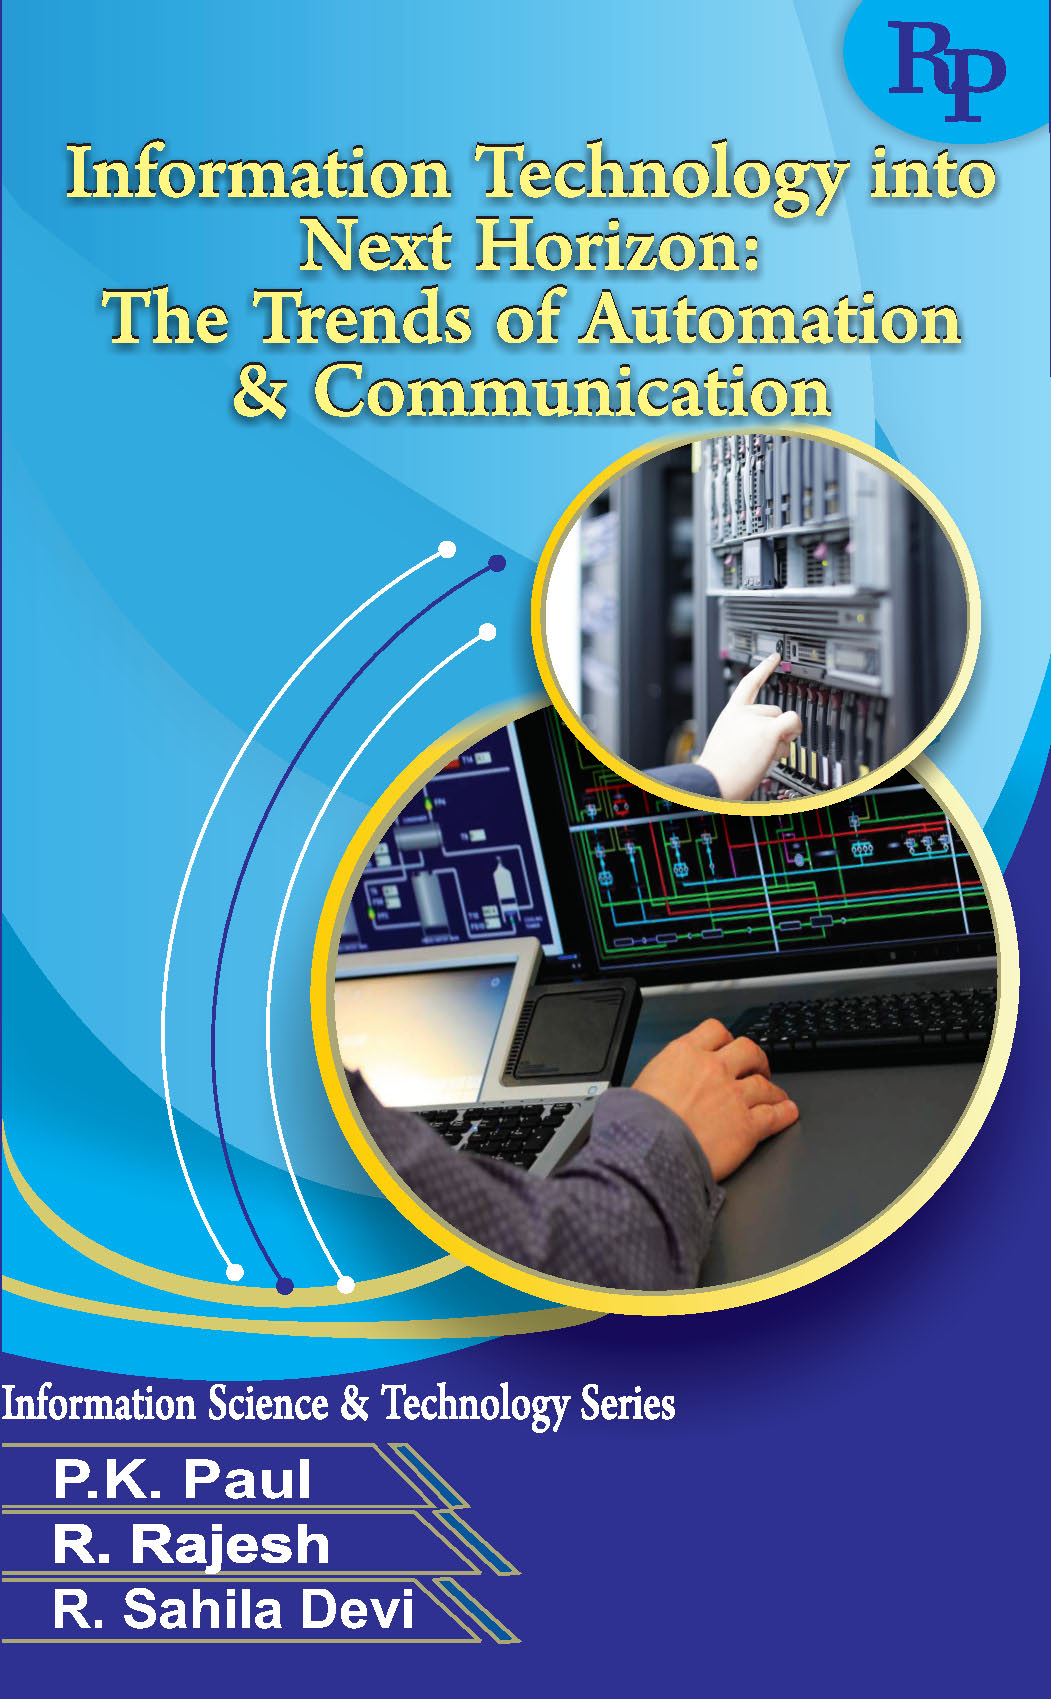 Information Technology into Information Technology into.jpg